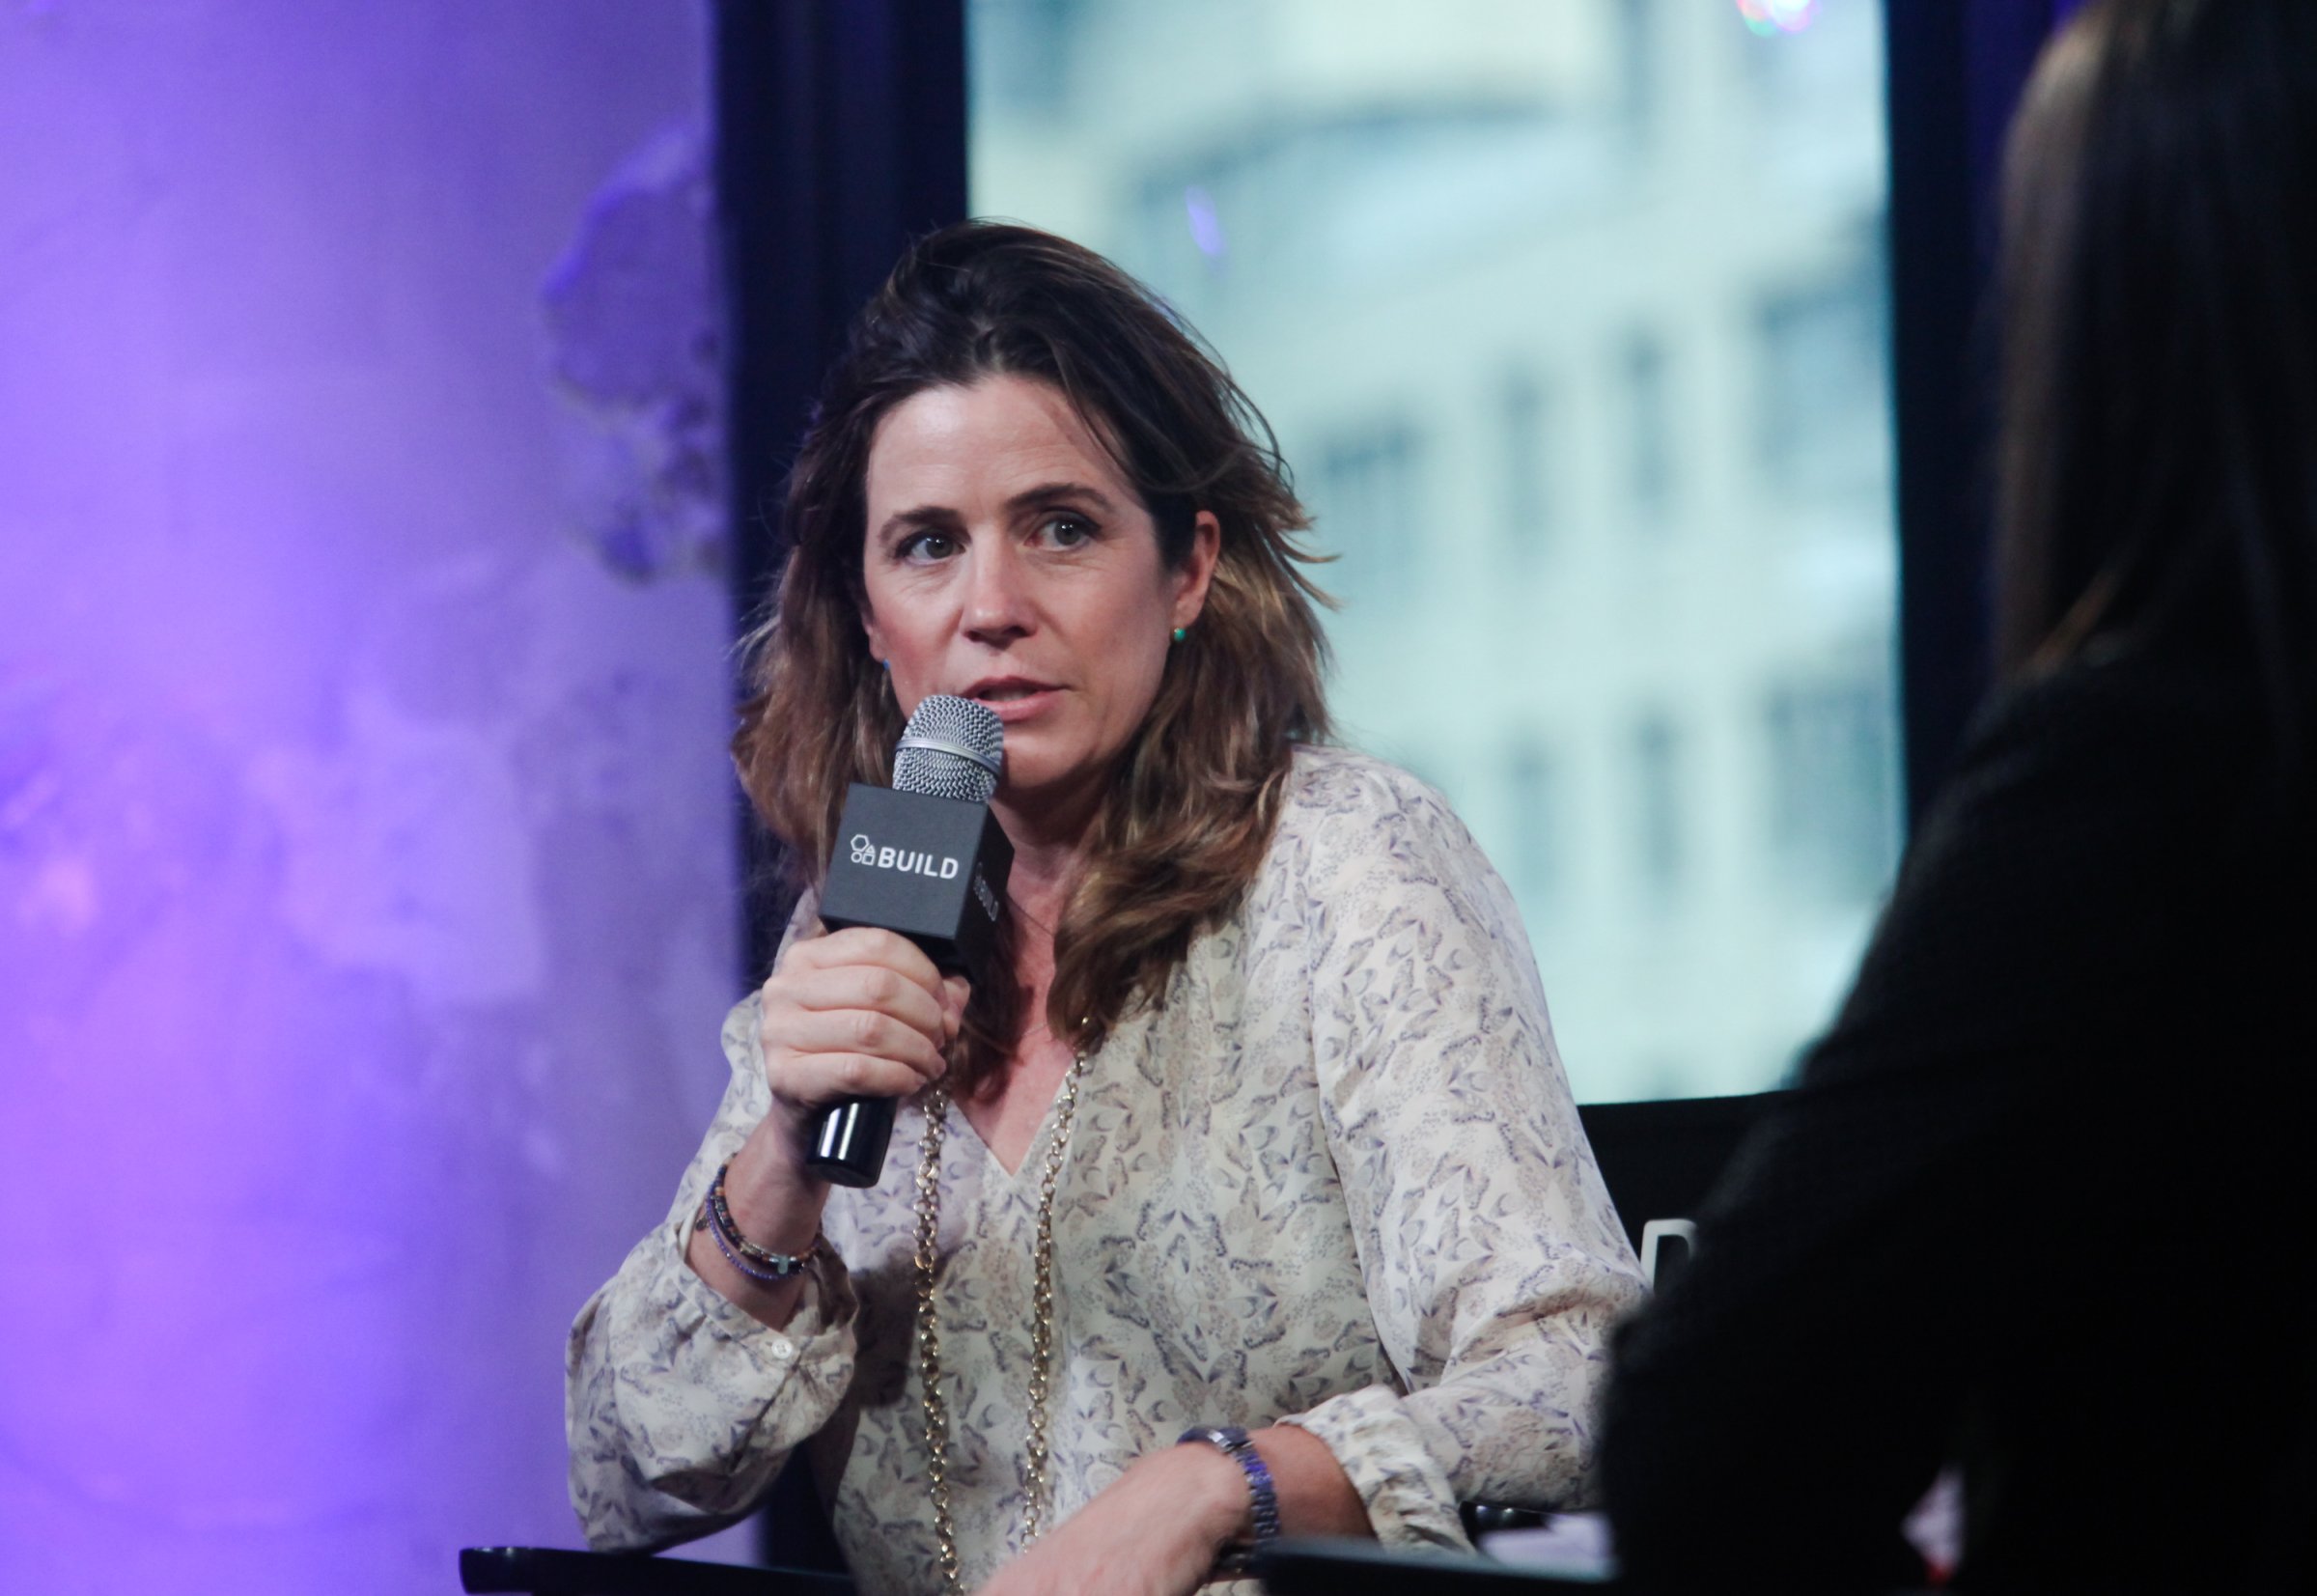 AOL Build Presents Tracy Droz Tragos Discussing Her New Documentary "Abortion: Stories Women Tell"